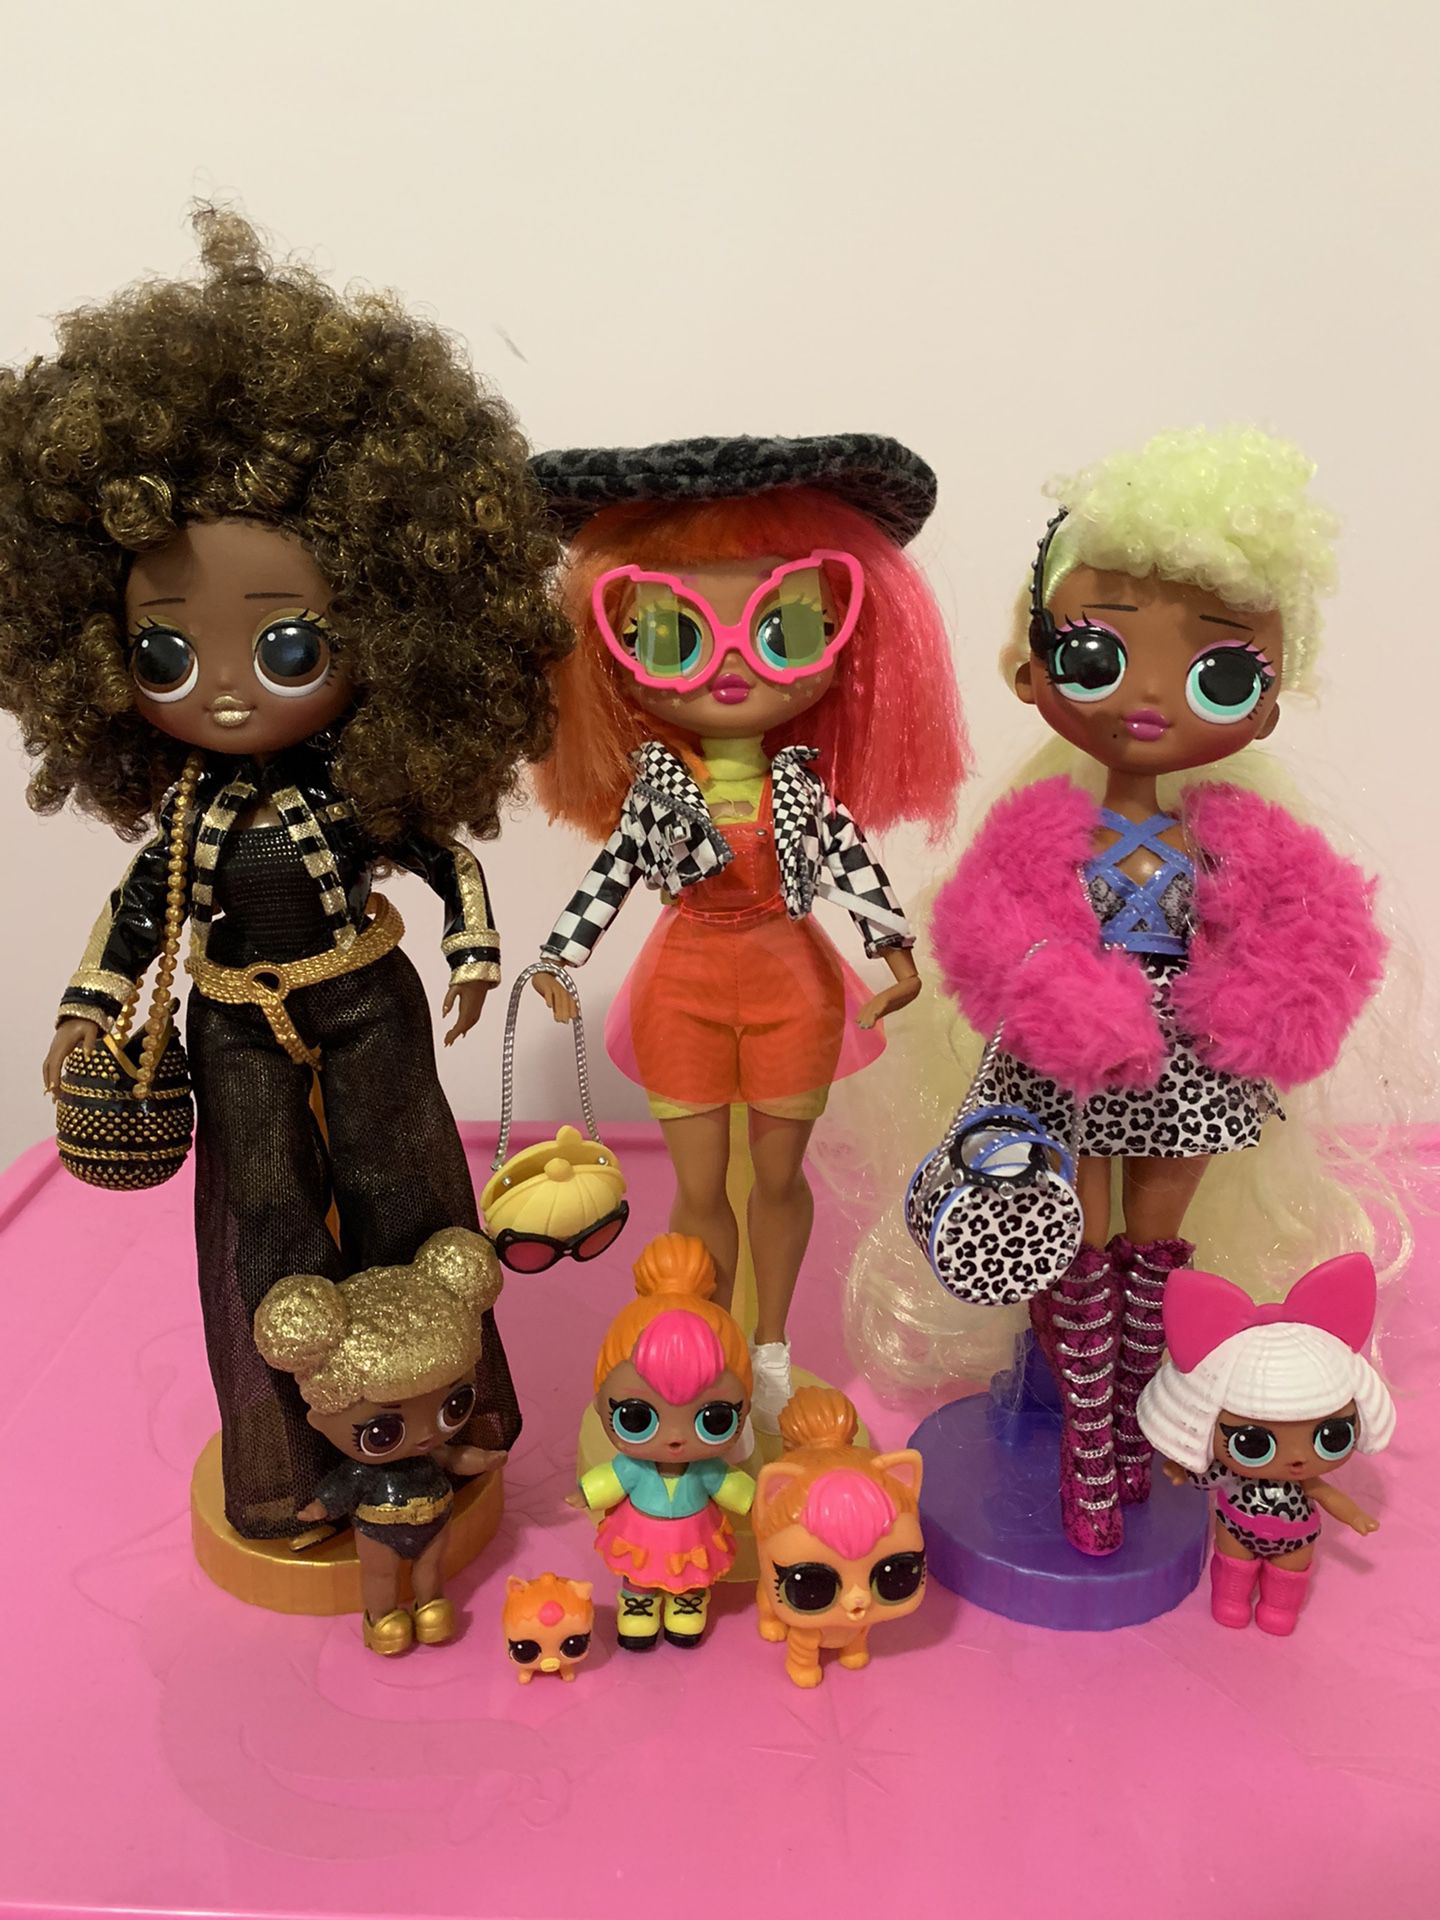 LOL Surprise OMG Dolls Series 1 Royal Bee, Neonlicious, Lady Diva